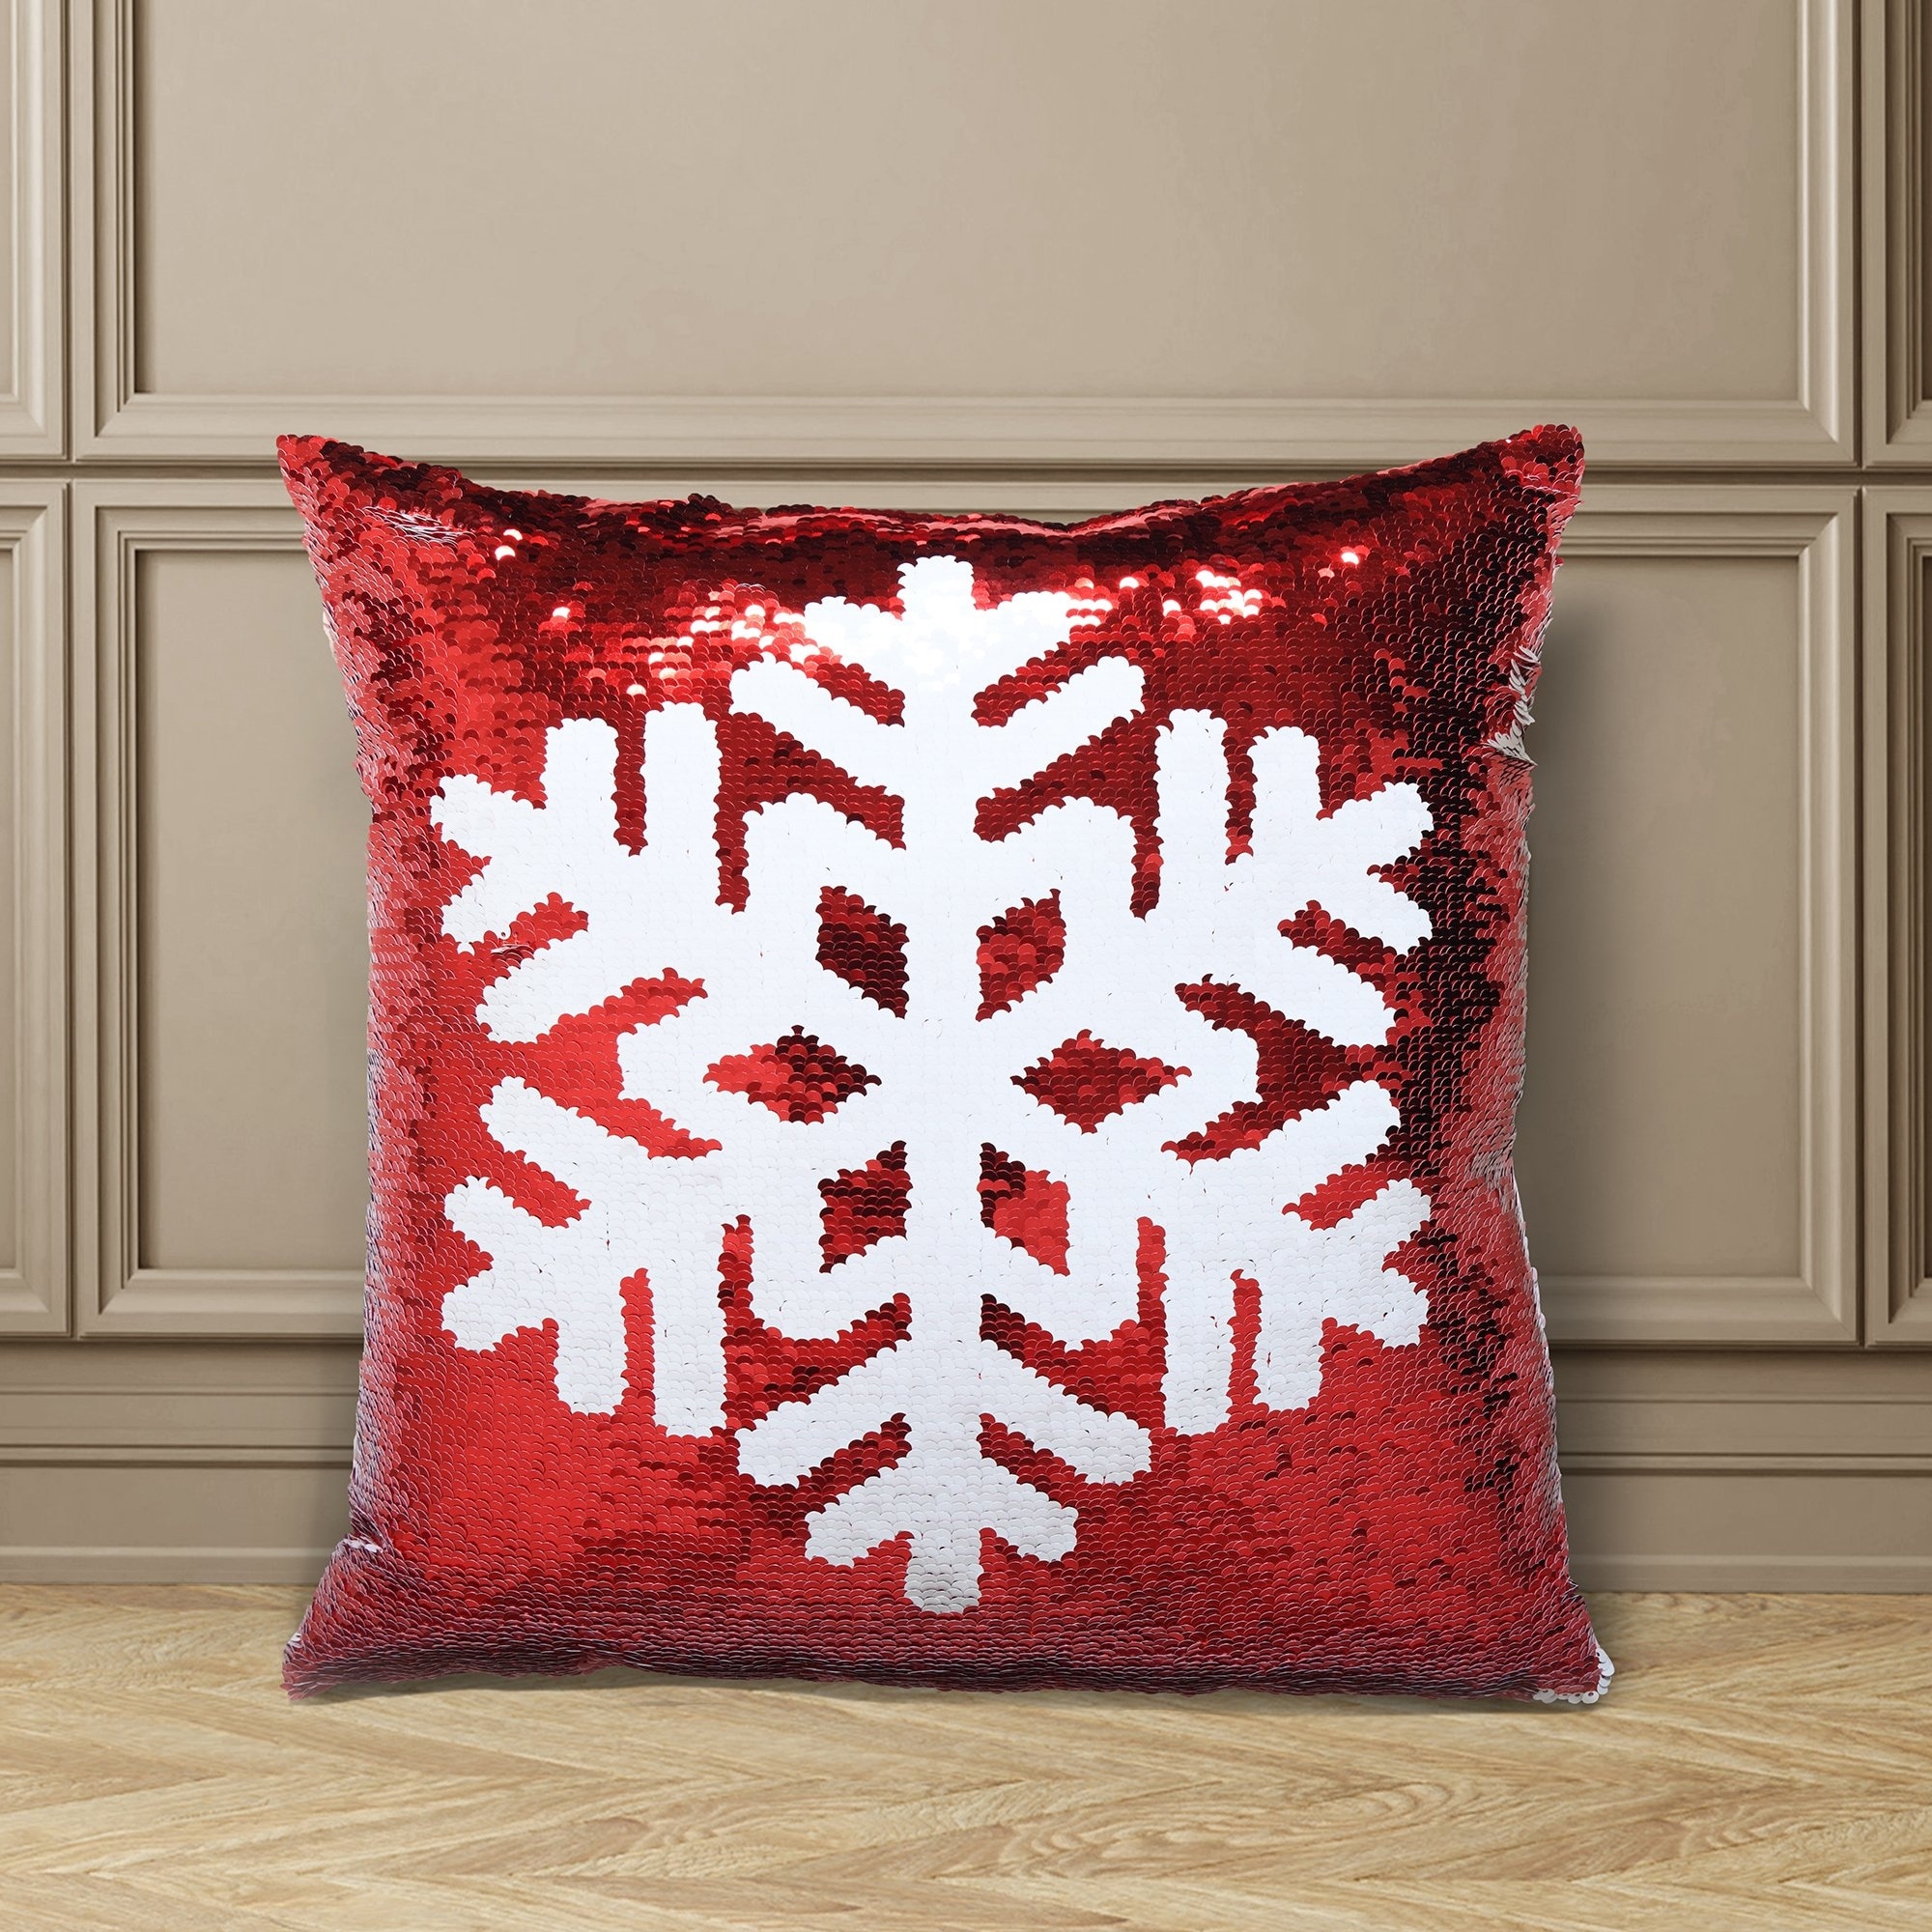 Lighted Embroidered Holiday Throw Pillows - Poinsettia